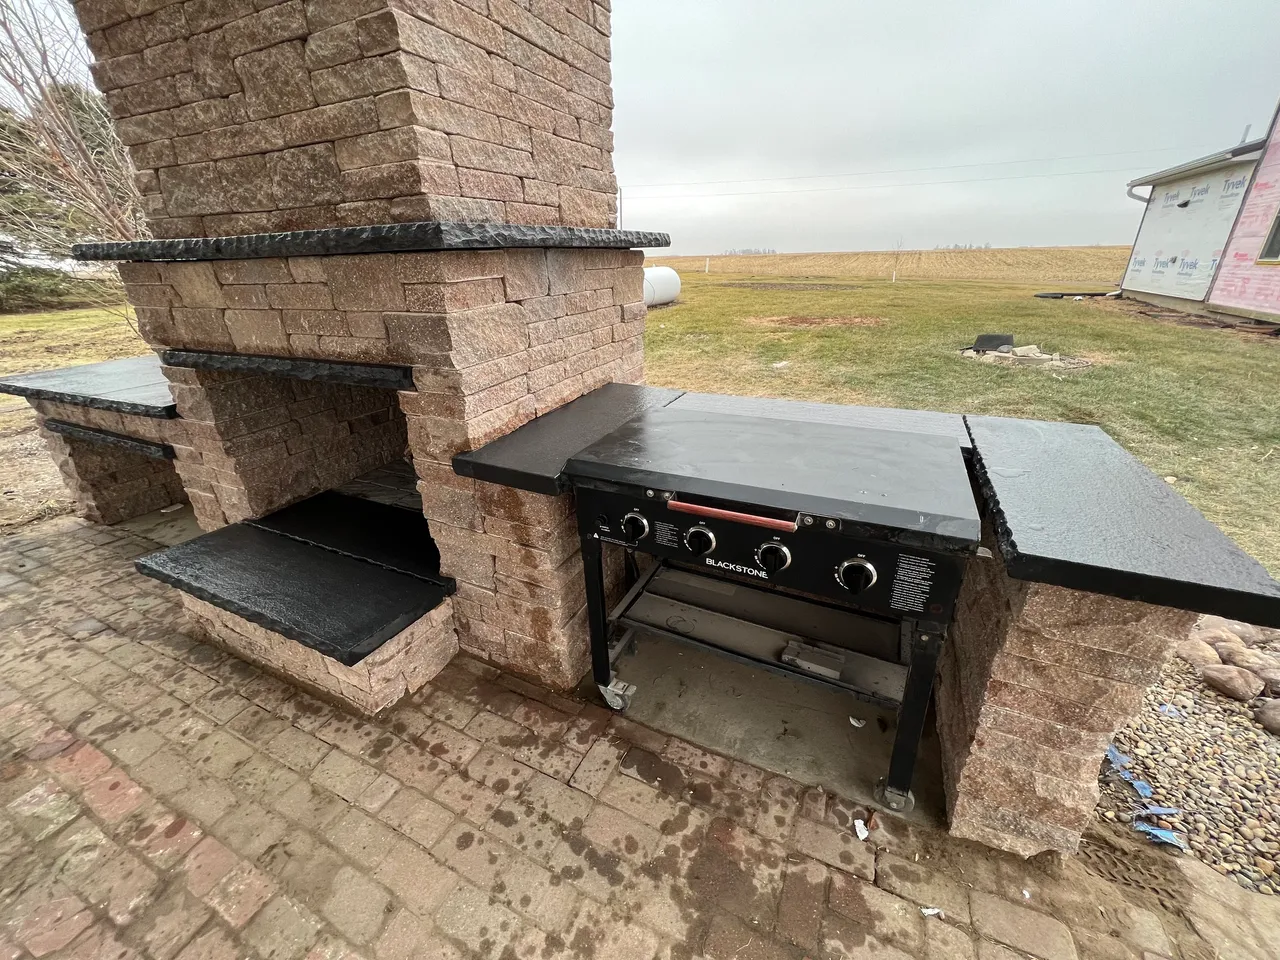 A grill and fireplace in the middle of an outdoor patio.